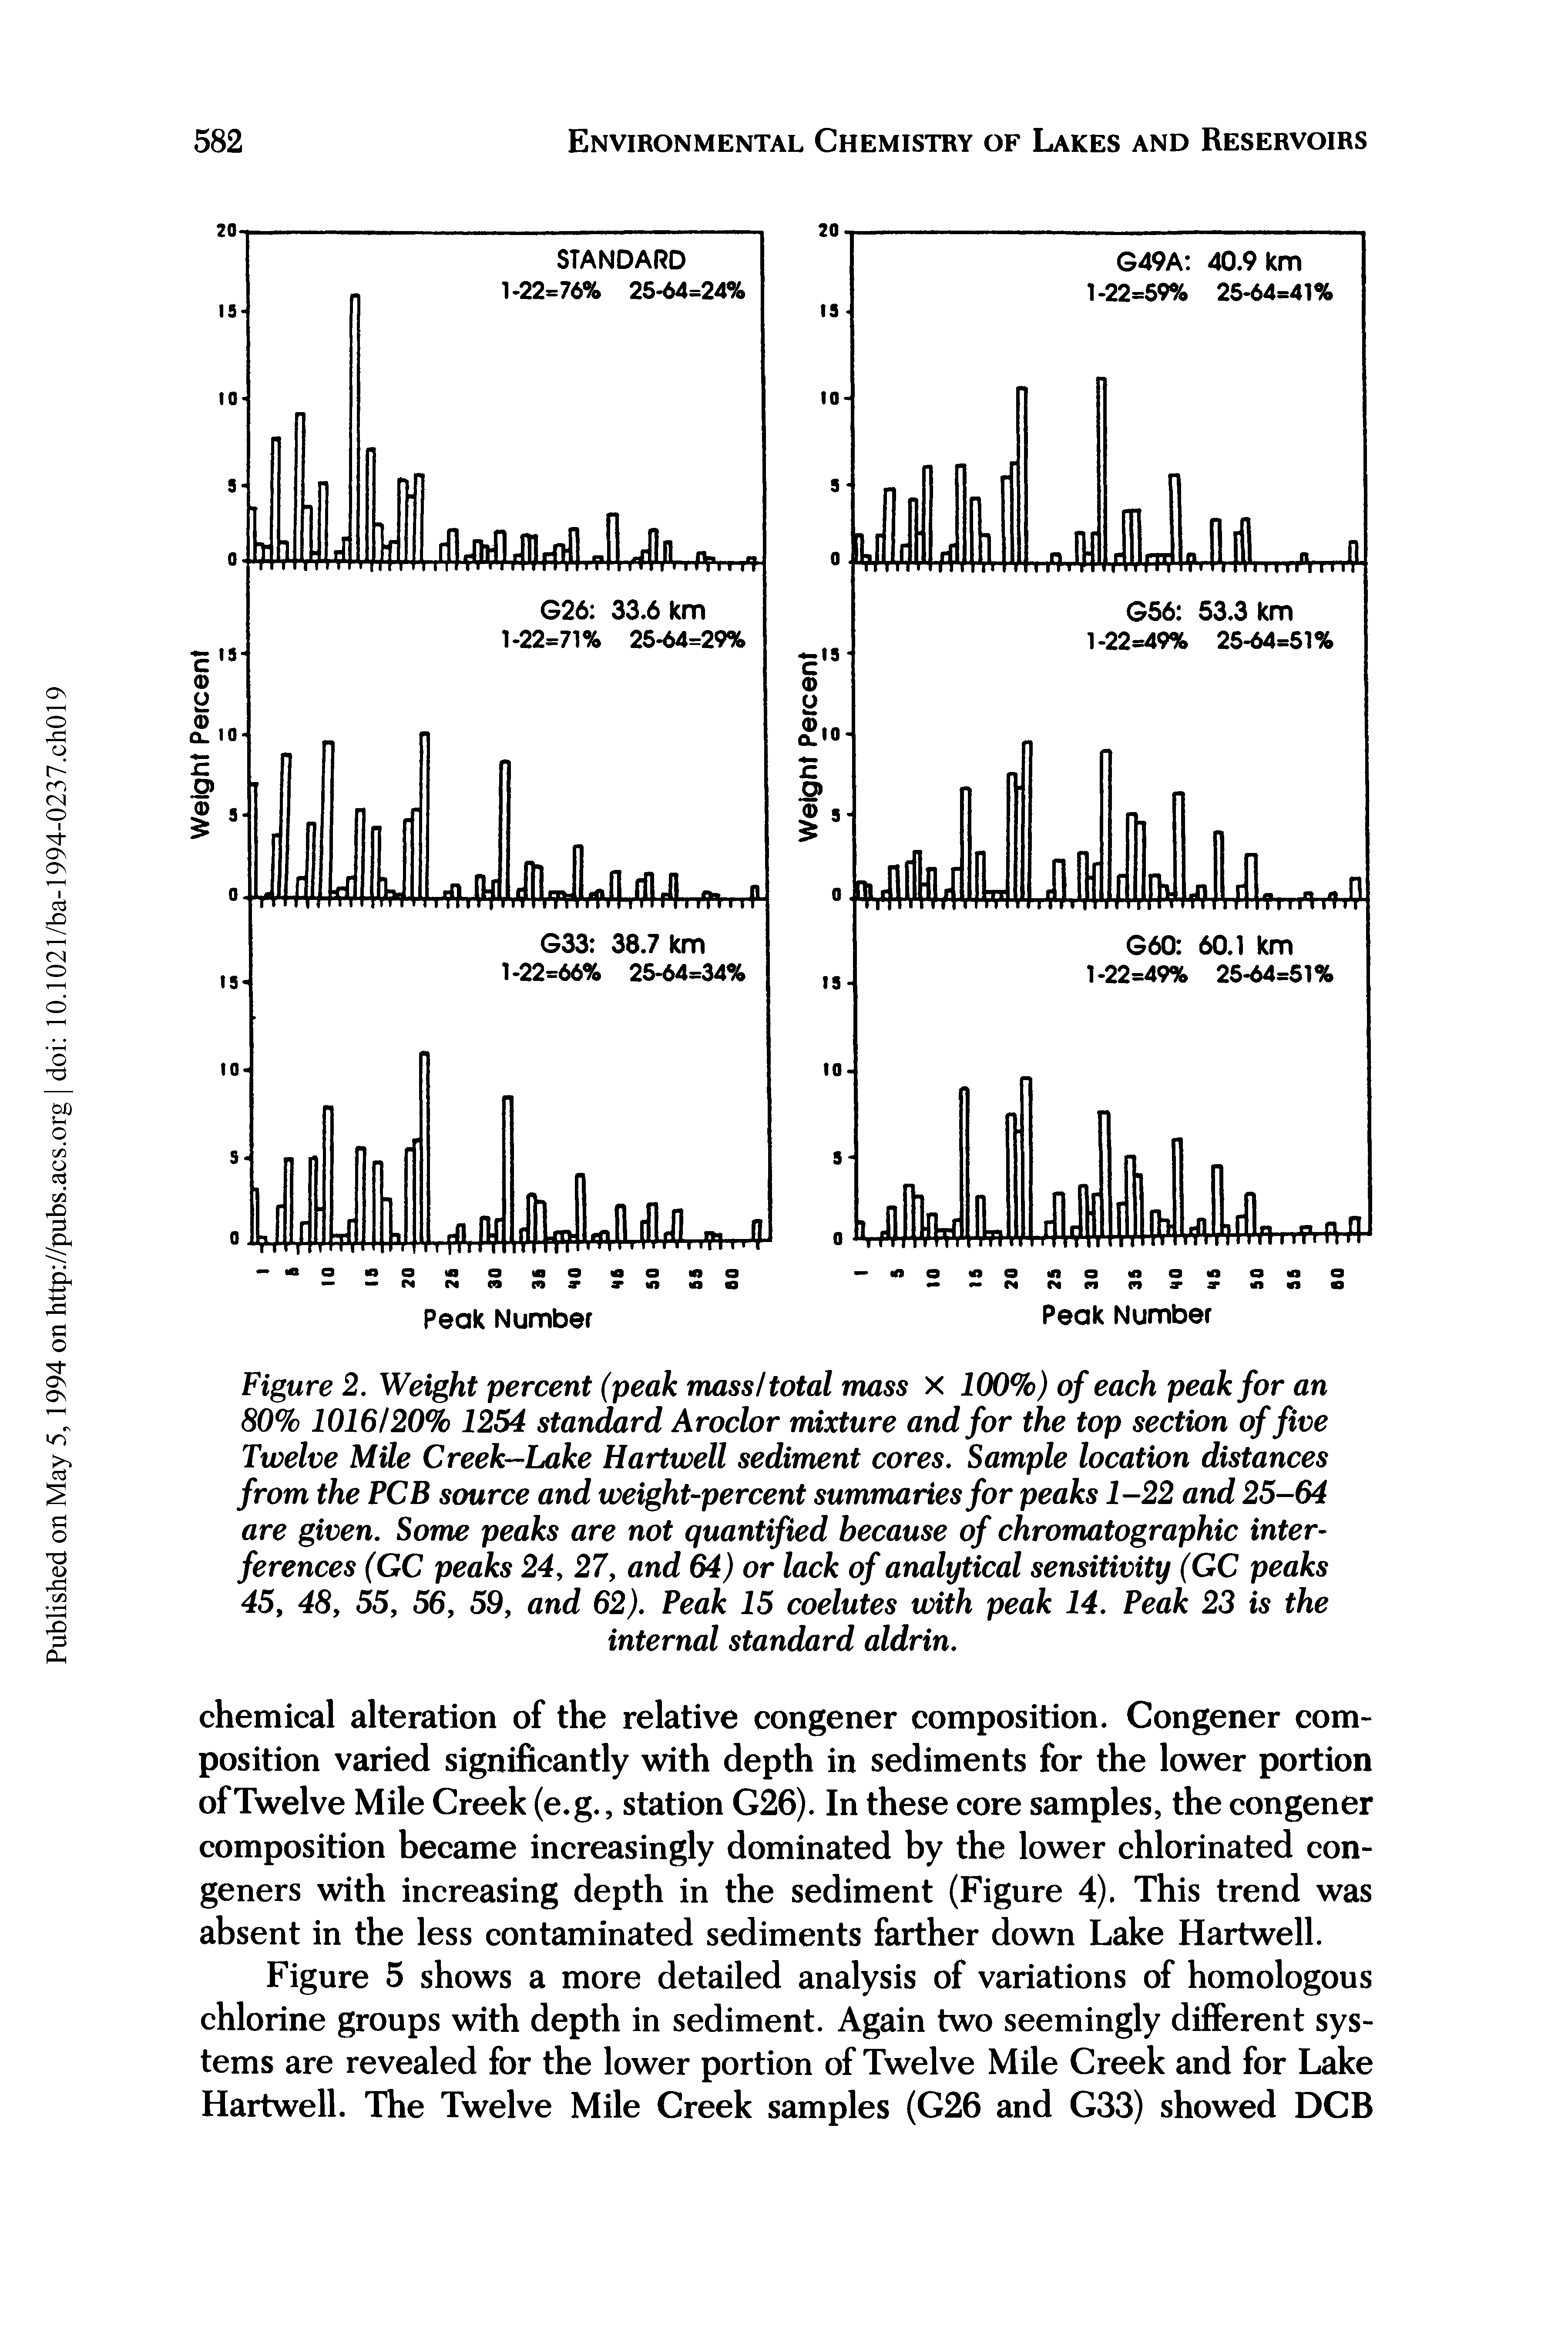 Figure 2. Weight percent (peak mass I total mass X 100%) of each peak for an 80% 1016/20% 1254 standard Aroclor mixture and for the top section office Twelve Mile Creek—Lake Hartwell sediment cores. Sample location distances from the PCB source and weight-percent summaries for peaks 1-22 and 25-64 are given. Some peaks are not quantified because of chromatographic interferences (GC peaks 24, 27, and 64) or lack of analytical sensitivity (GC peaks 45, 48, 55, 56, 59, and 62). Peak 15 coelutes with peak 14. Peak 23 is the internal standard aldrin.